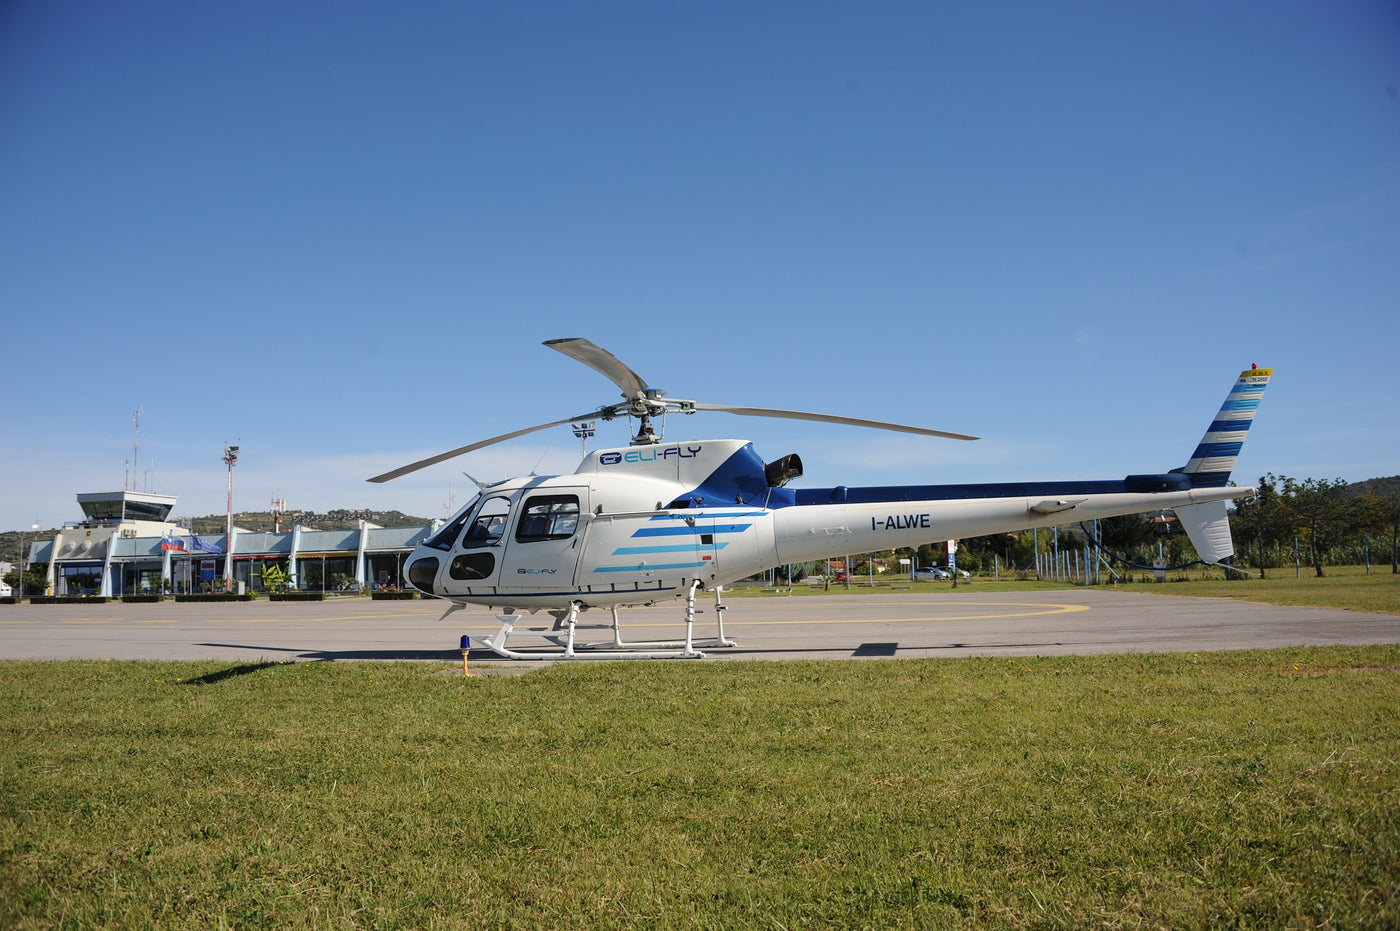 Helicopter disposal model AS350 helicopter Esine - Brusaporto (BG)